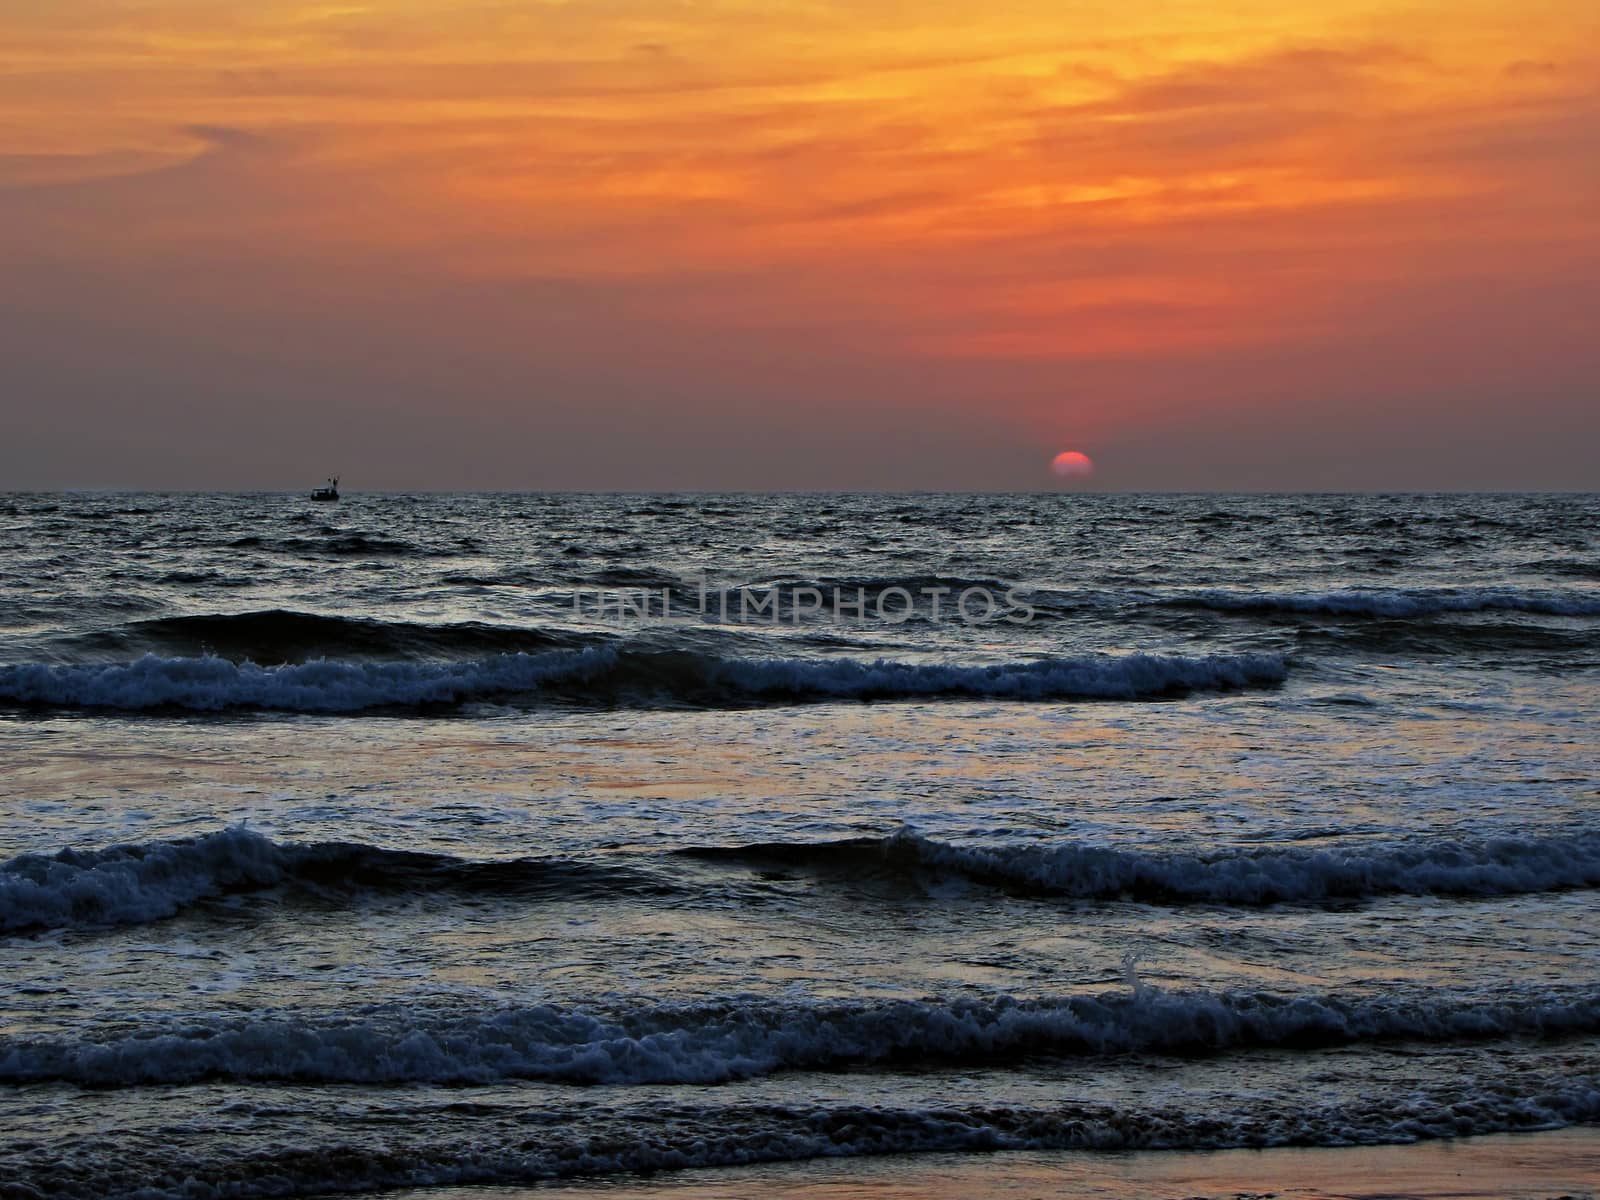 A small boat sailing in the sea with waves on a background of beautiful Sunset.